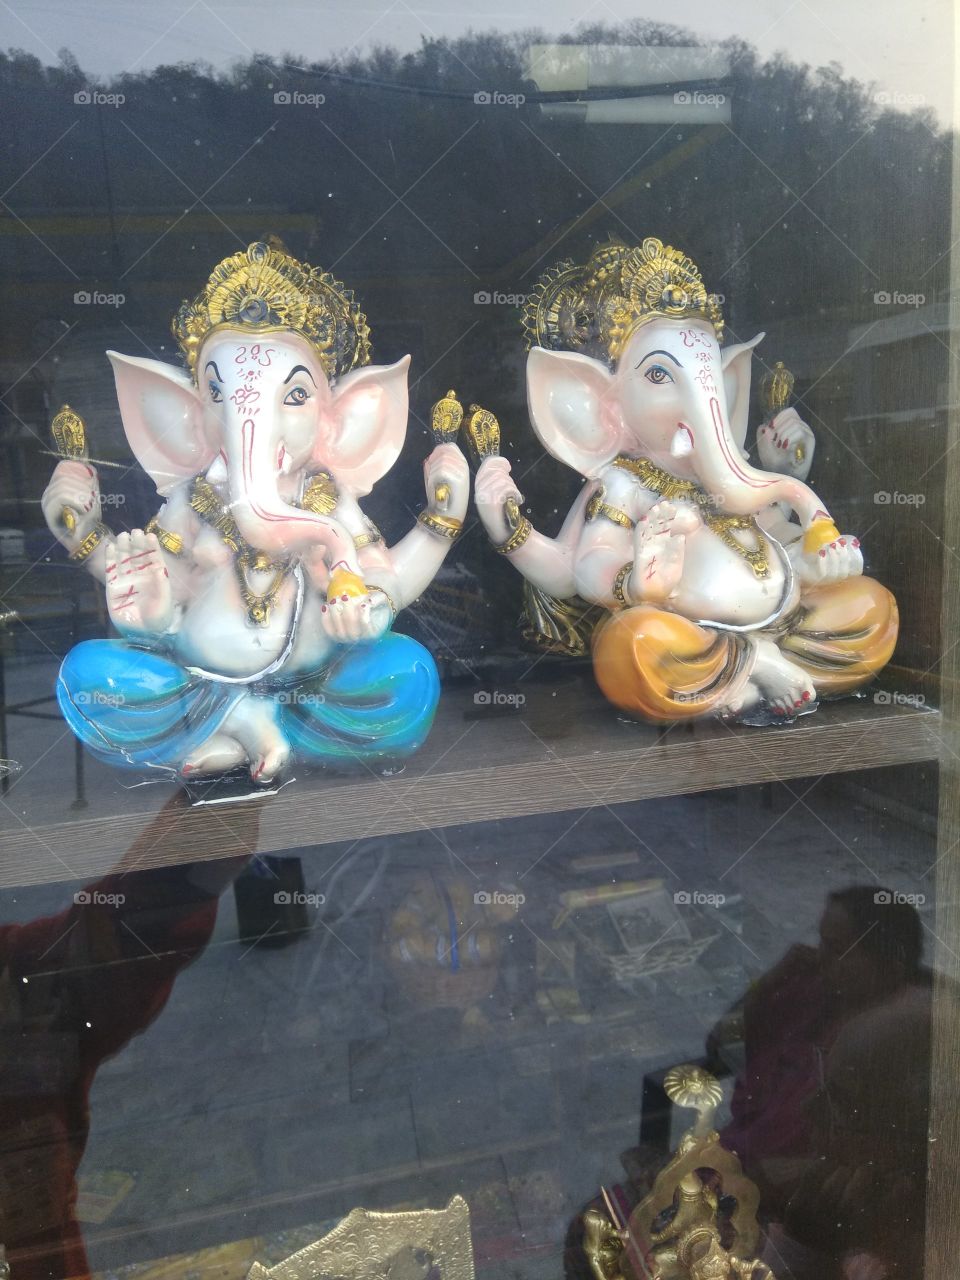 The Lord Ganesha is known for the best child of lord Shiva and Mata Parvati. The hindus of India worship for the best come their home and negative things waived off